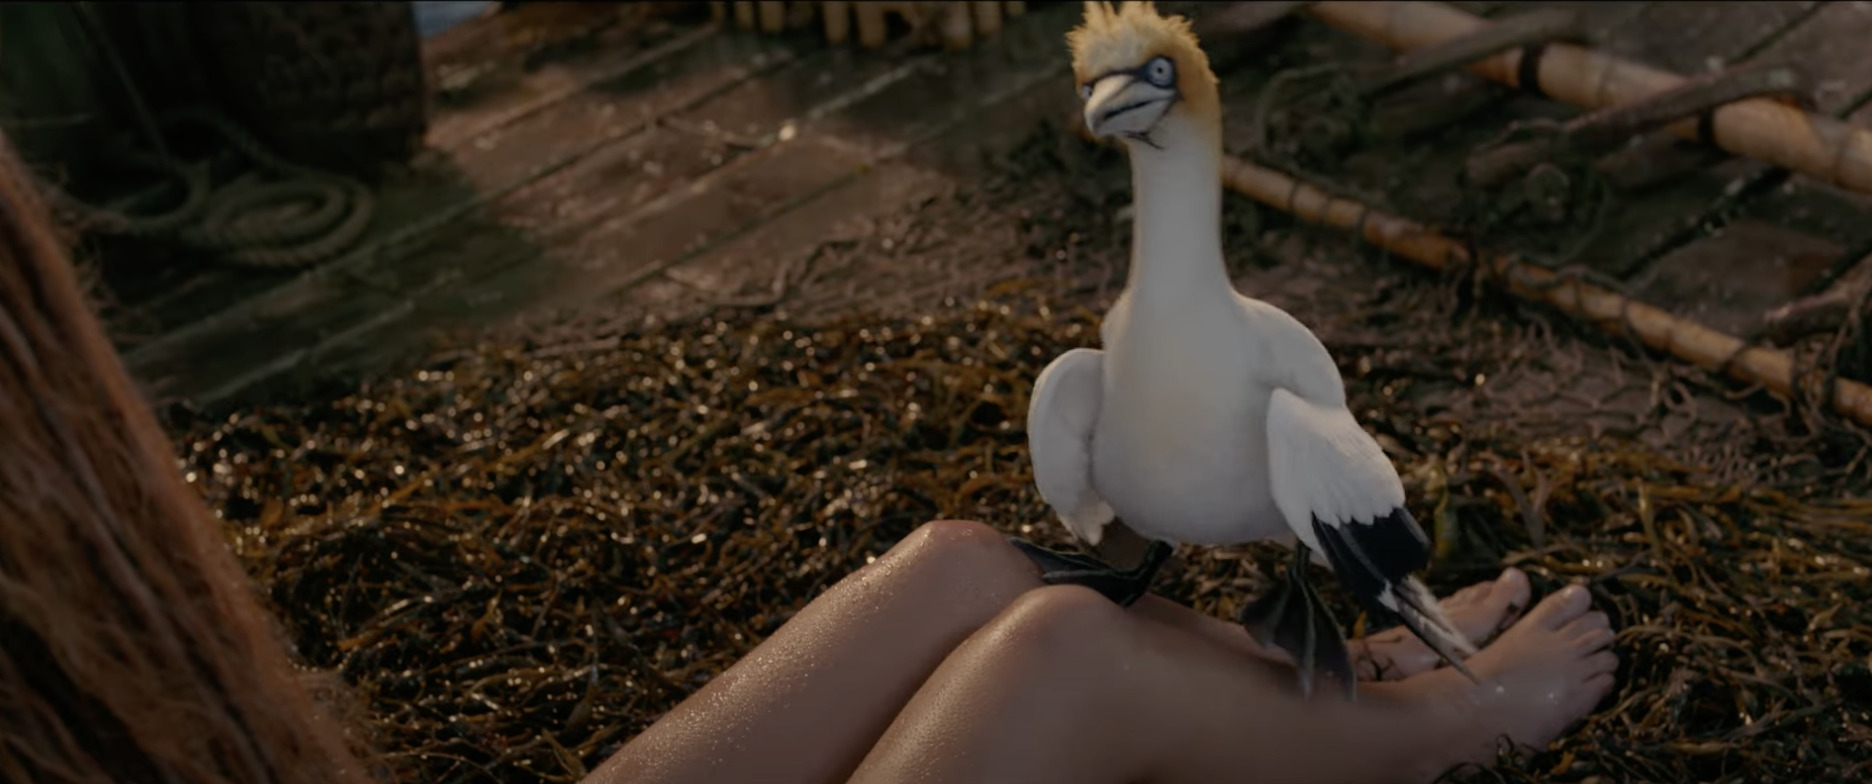 First Look at Scuttle & Sebastian from Disney's LiveAction Little